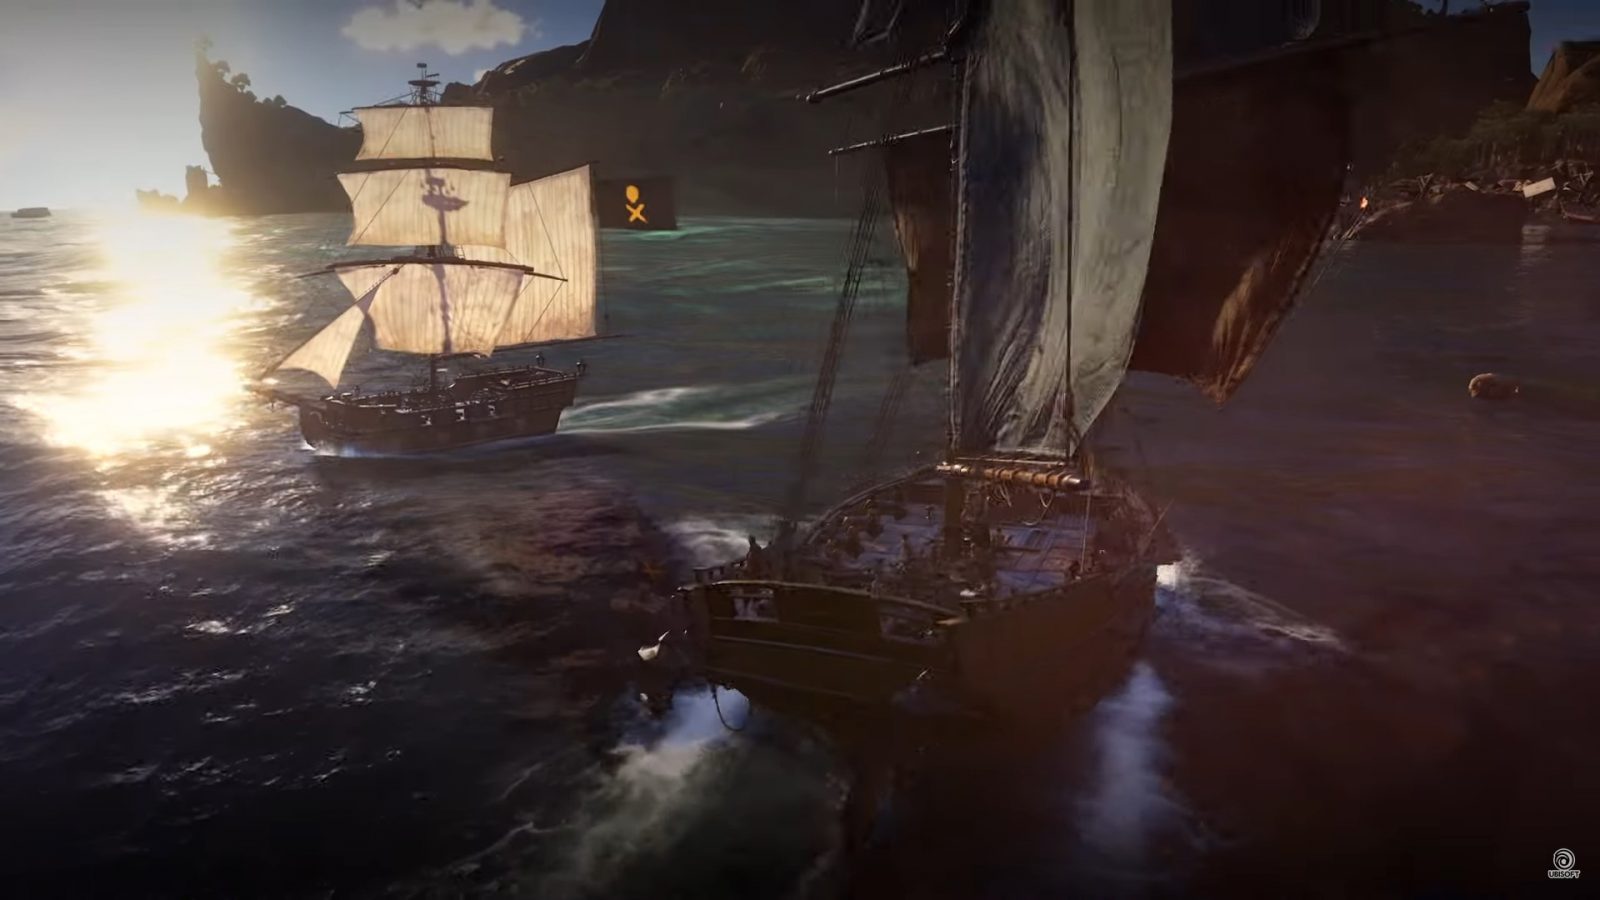 Will Skull and Bones be free to play?